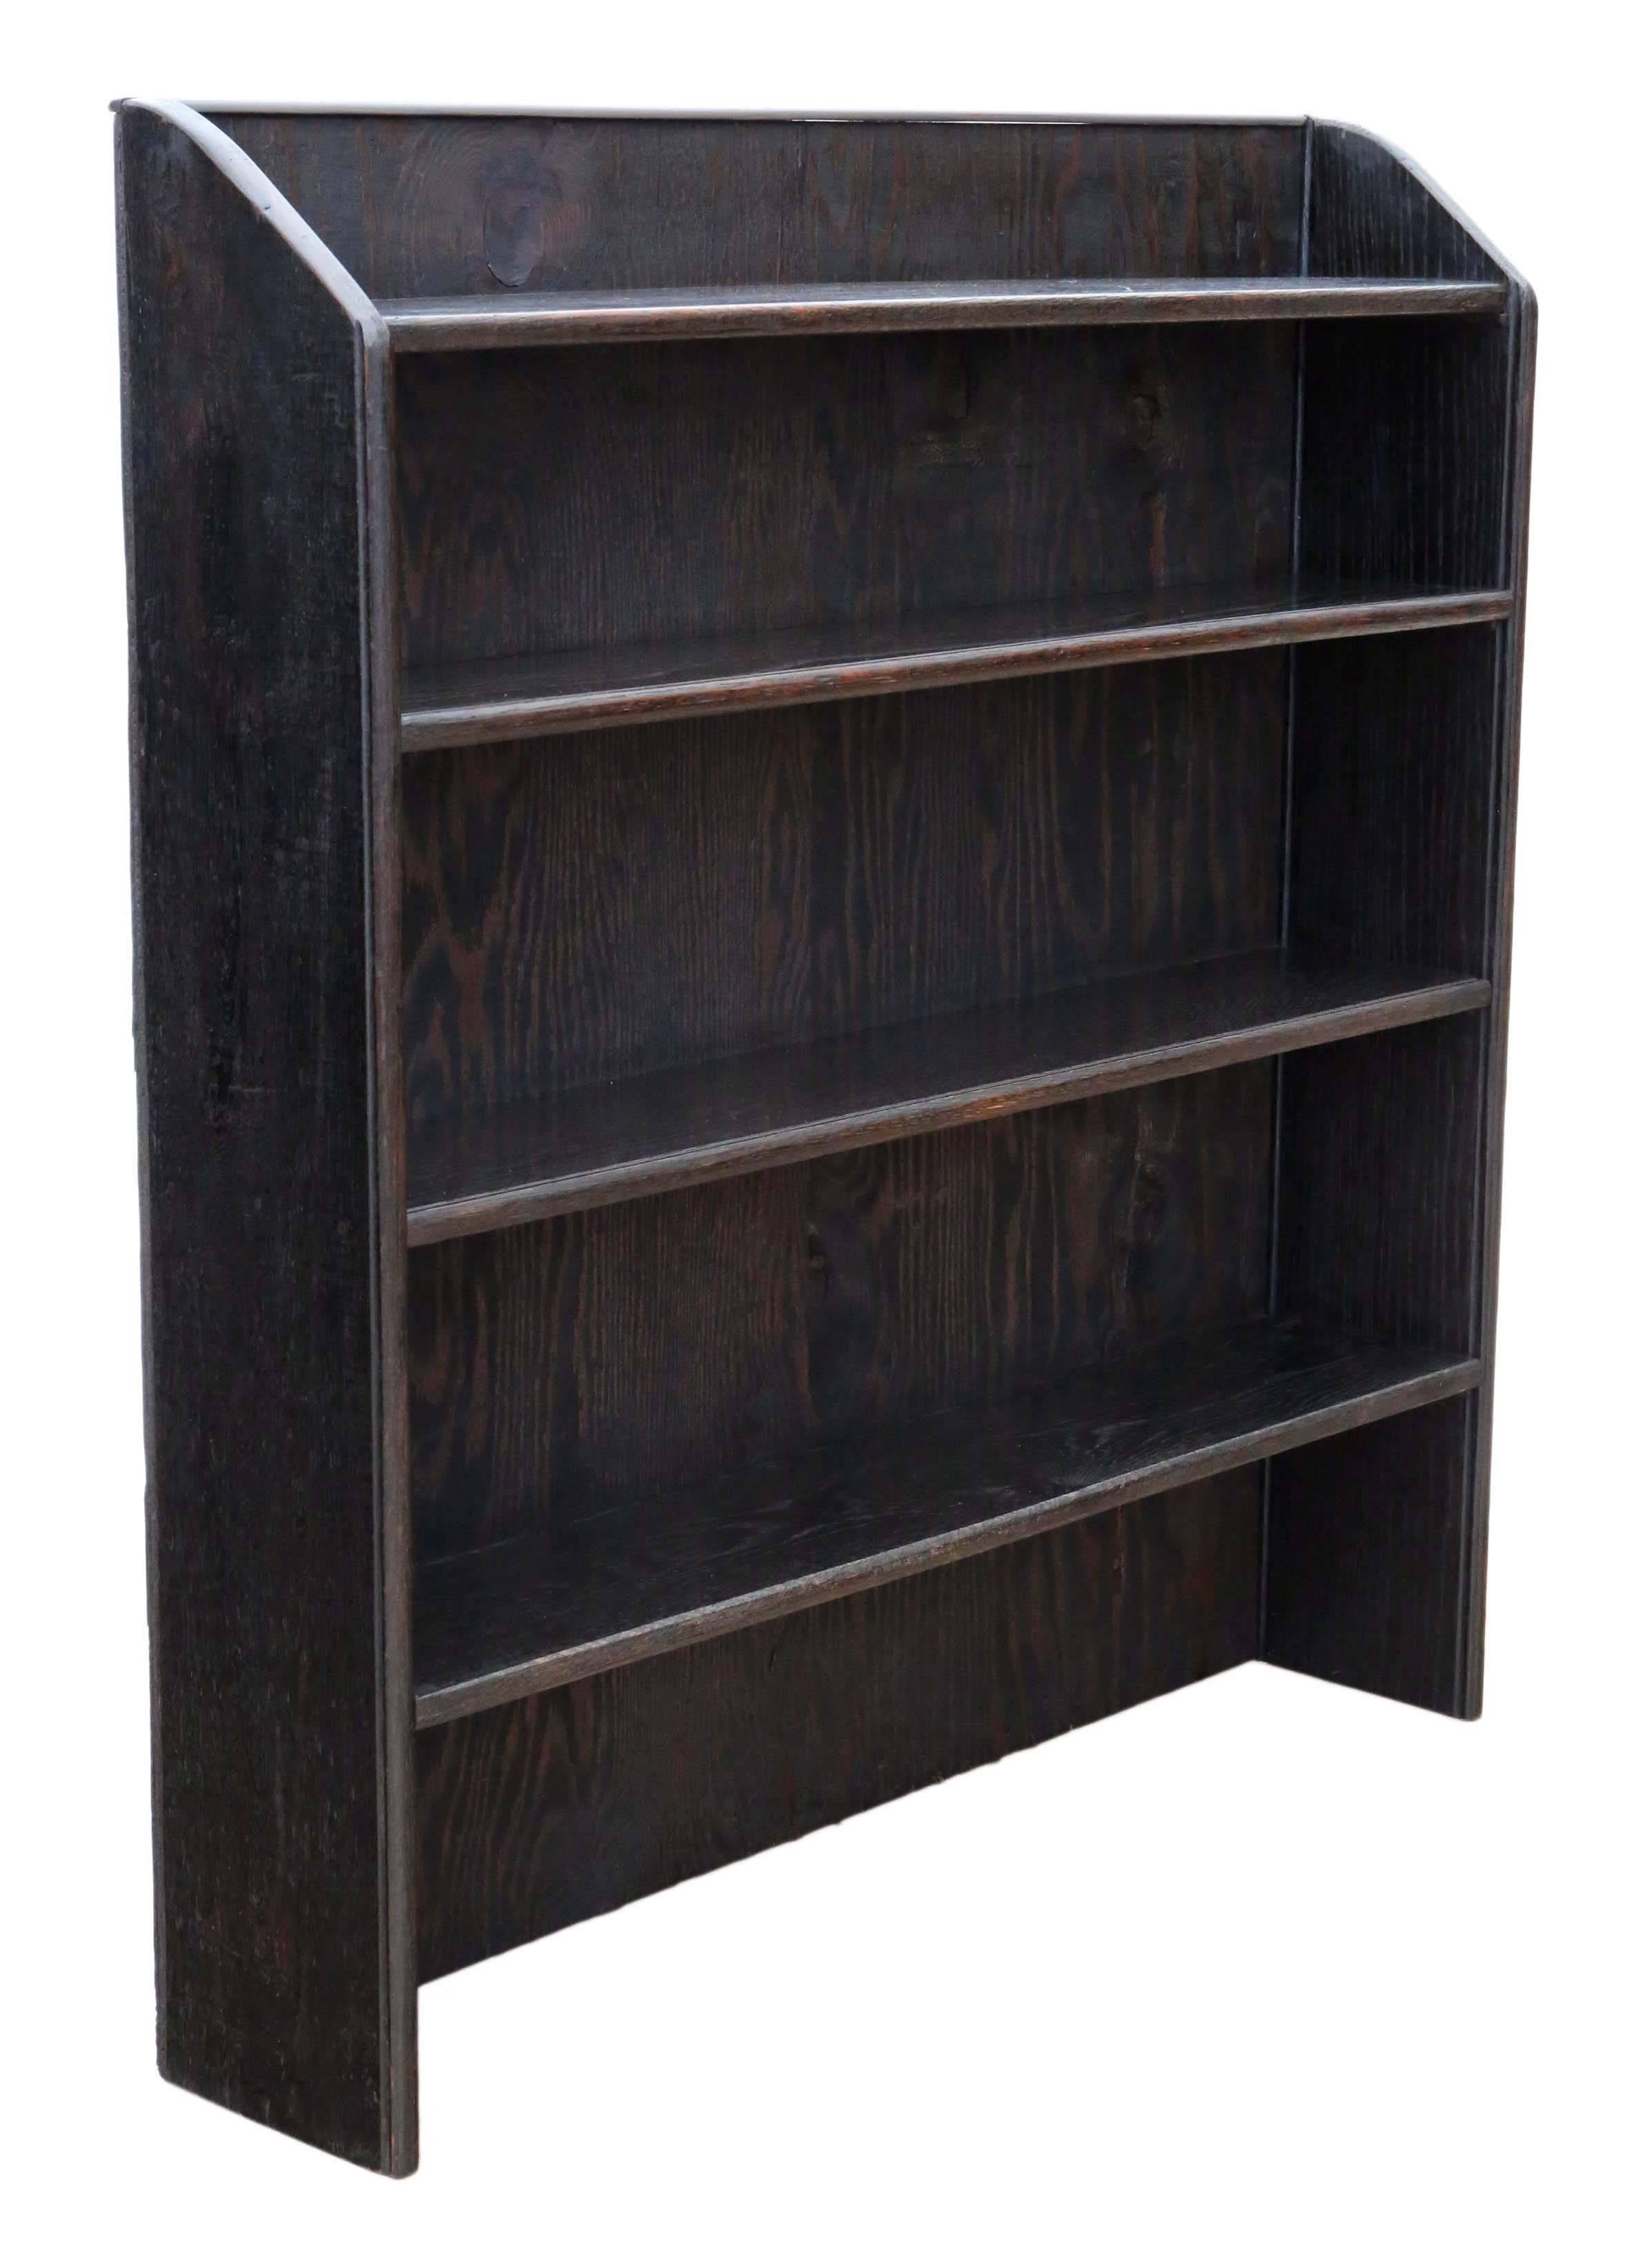 Antique Victorian Oak Open Bookcase Display Shelves In Good Condition For Sale In Wisbech, Walton Wisbech